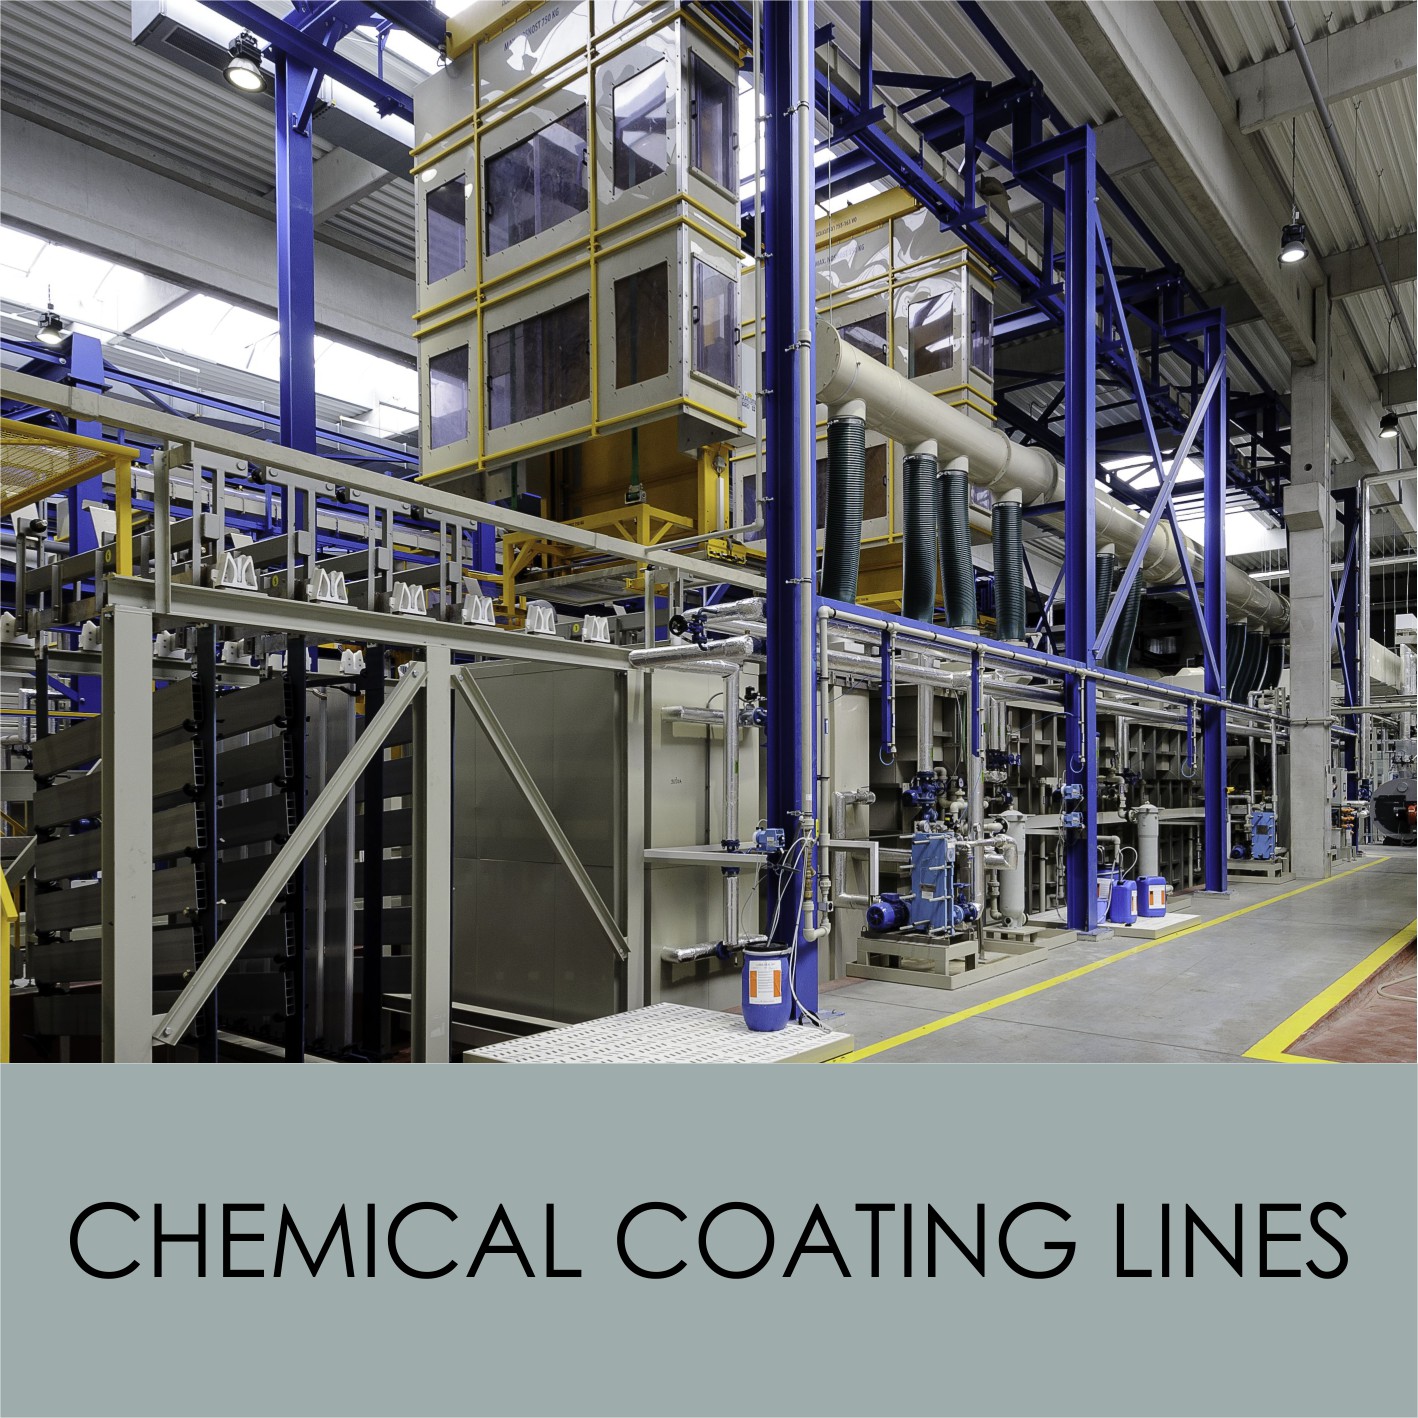 Chemical coating lines